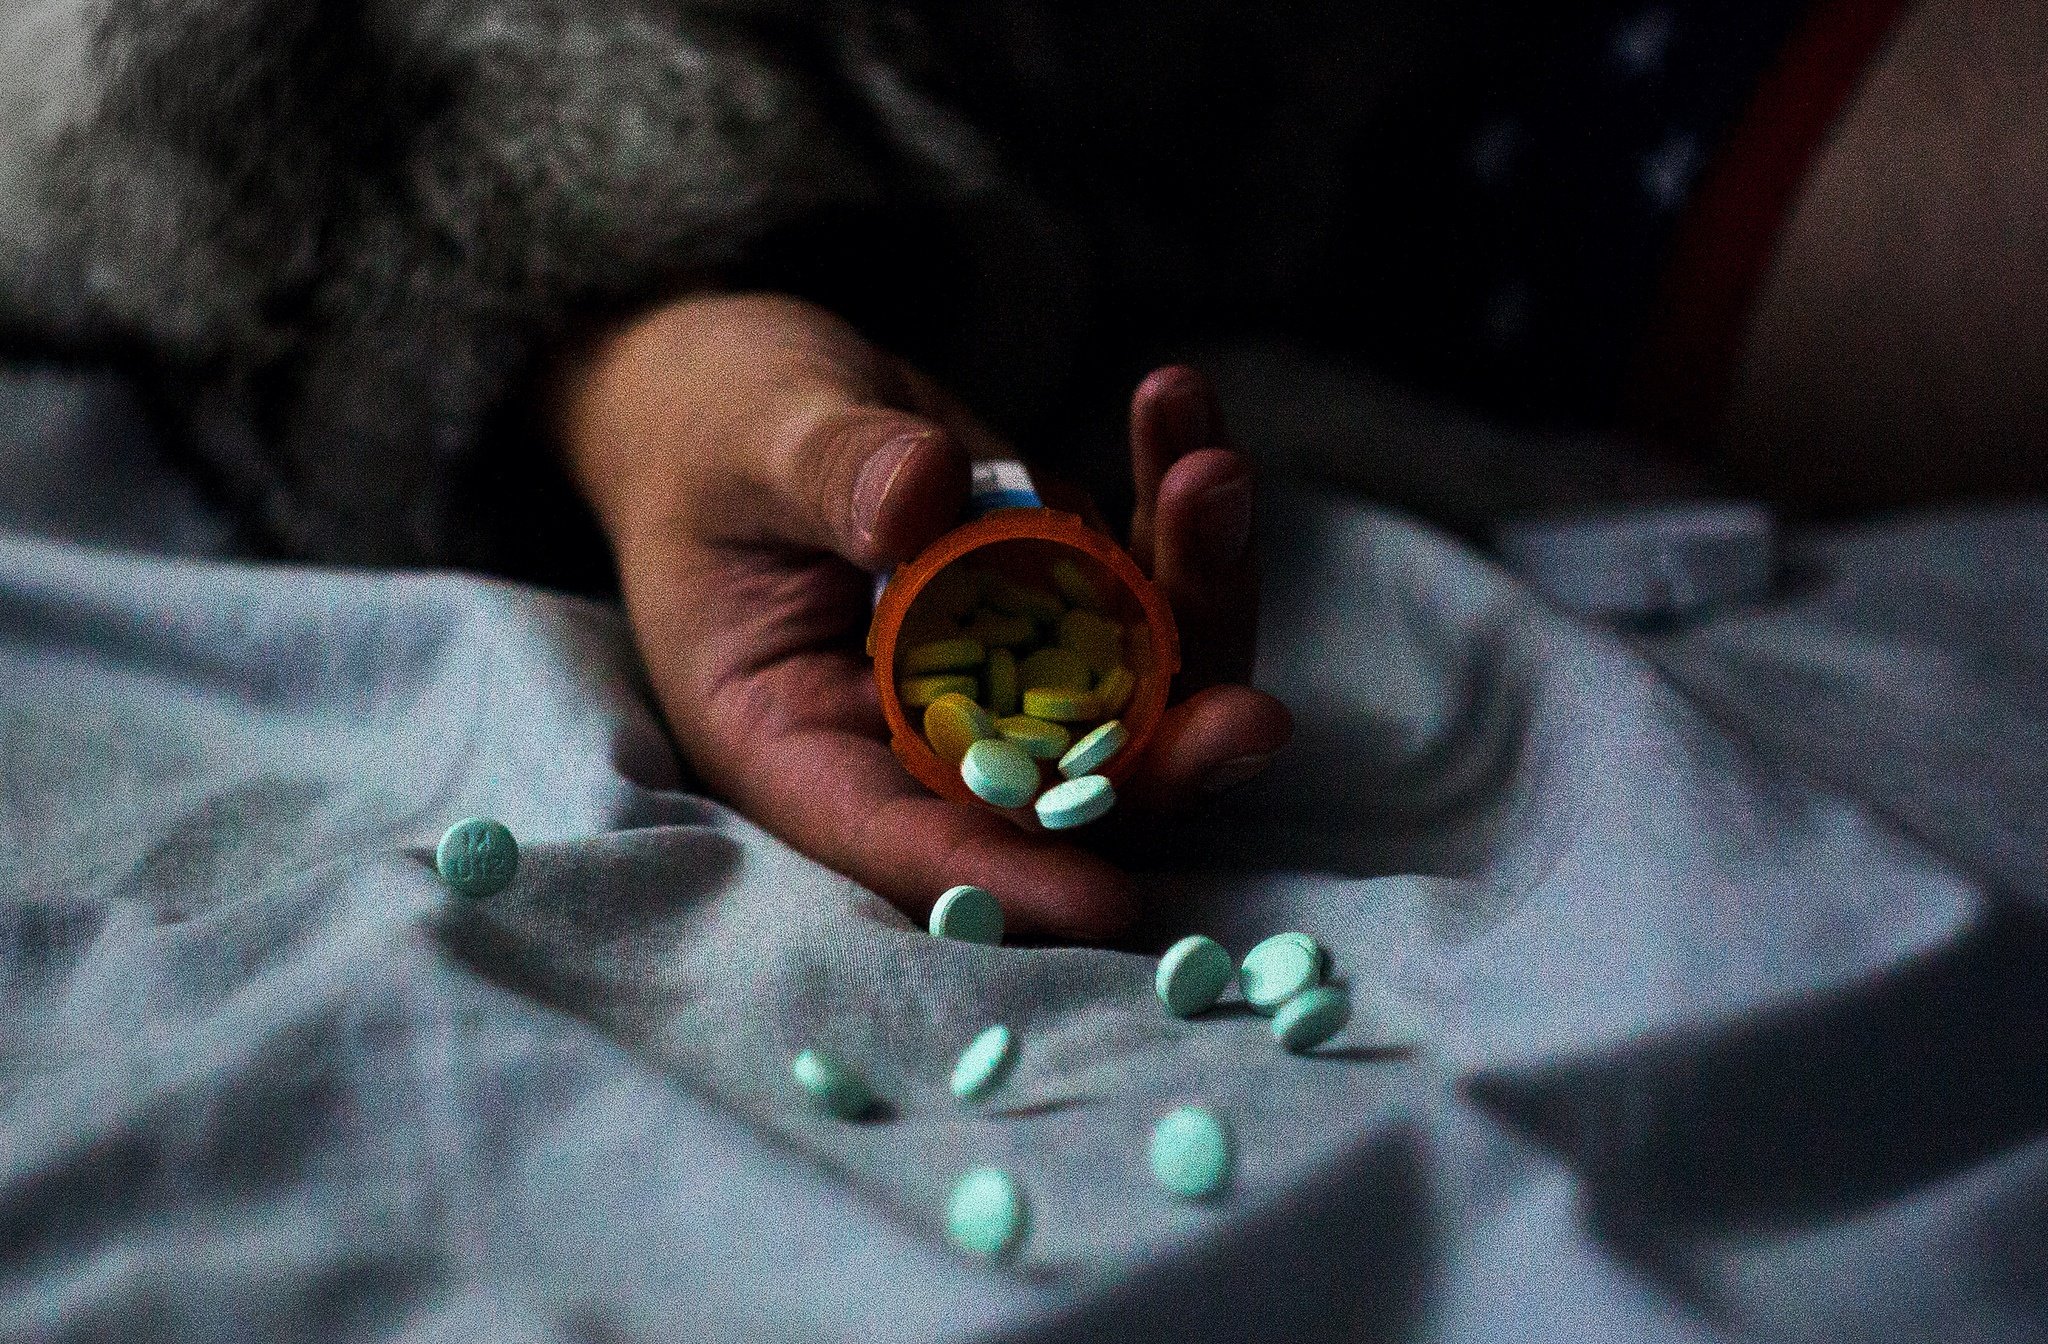 5 Things That Happen When You Date a Drug Addict